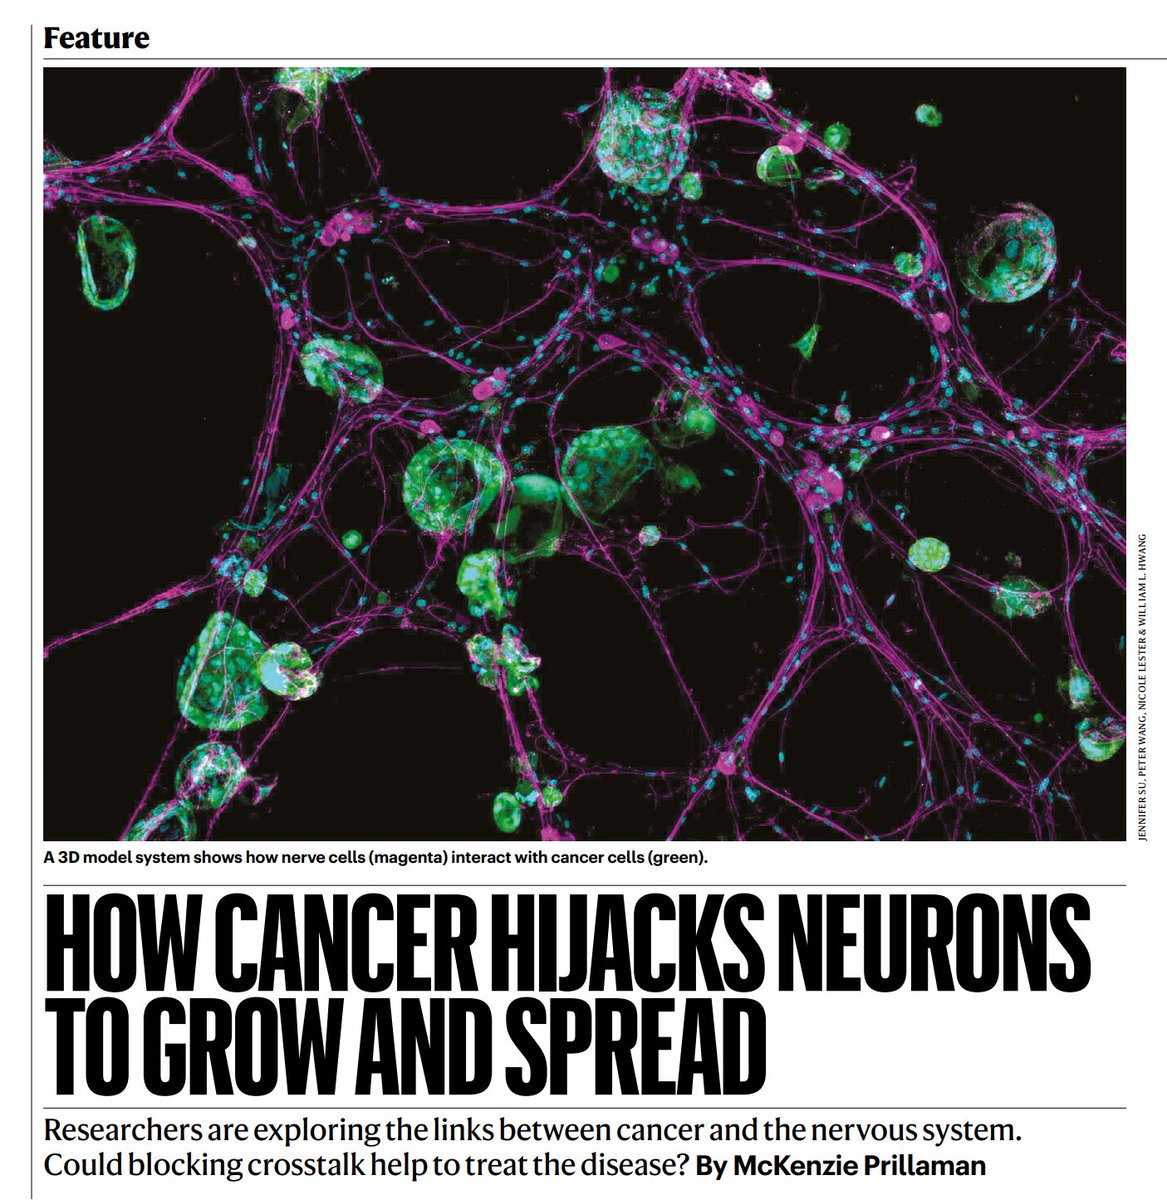 Thank you @Nature for featuring our lab's #CancerNeuroscience image on the front page of nature.com this week! Good timing for the upcoming #CancerNeuroscienceSymposium @MDAndersonNews being held February 28-March 1, 2024 👉mdanderson.cloud-cme.com/course/courseo…